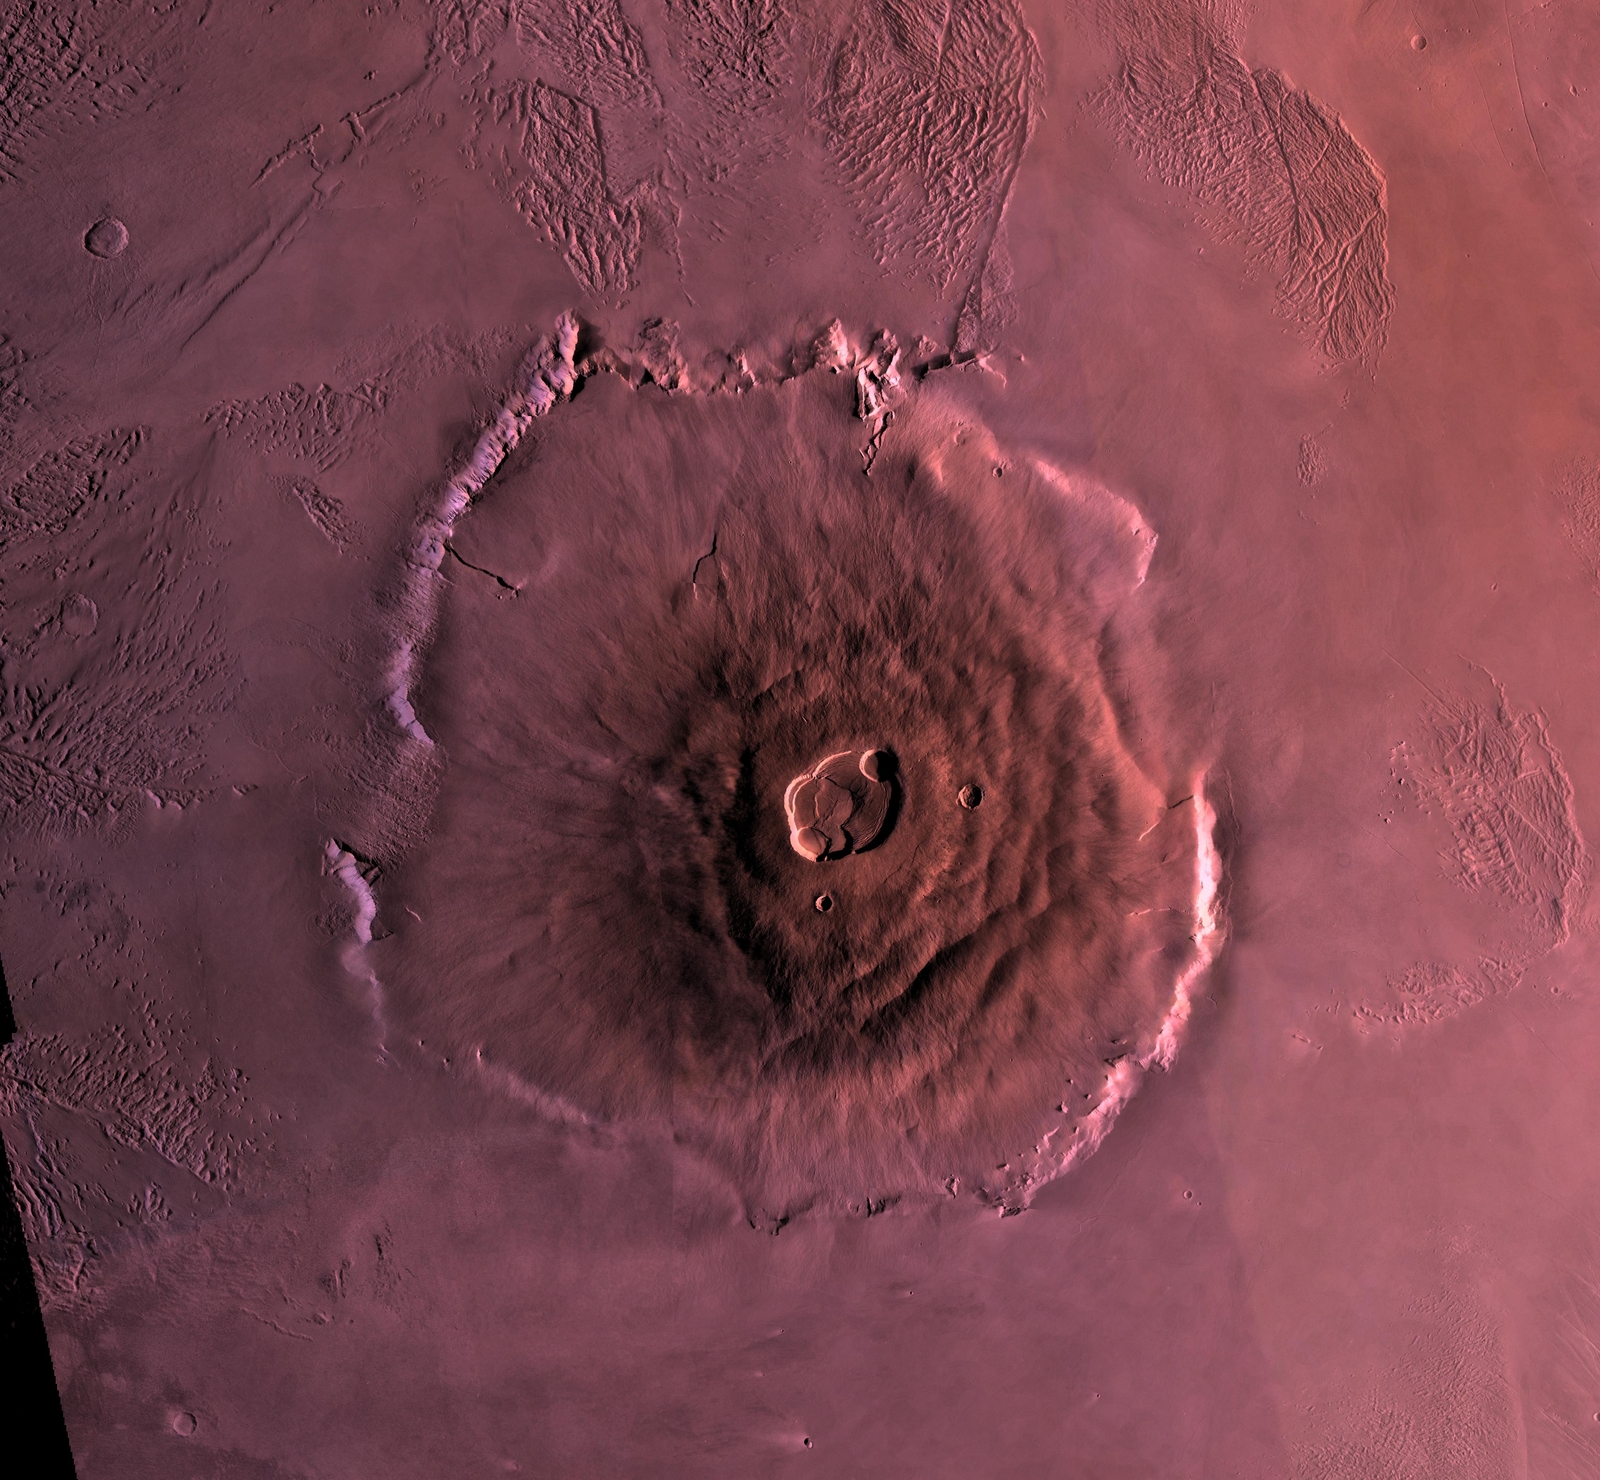 Shown here is a digital mosaic of Olympus Mons, the largest known volcano in the Solar System.